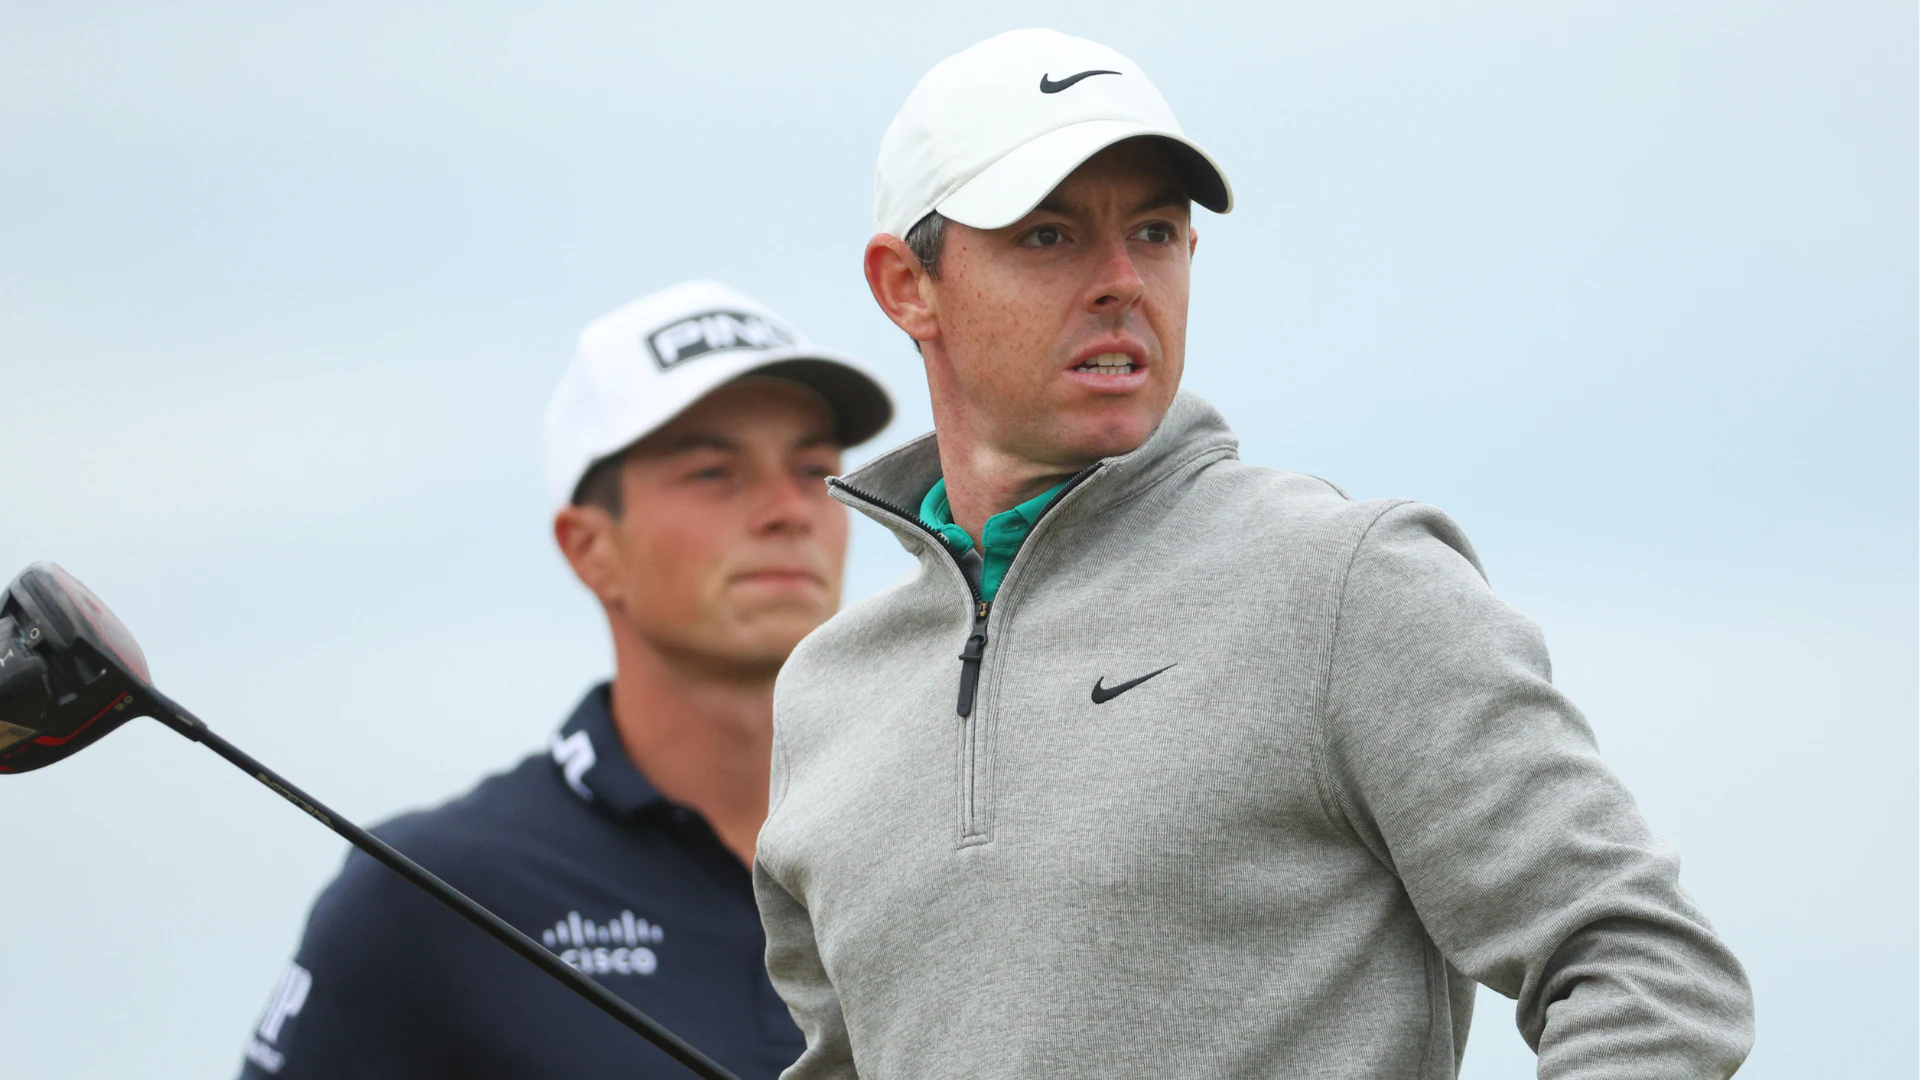 2022 British Open: The five most compelling storylines for Sunday at the 150th Open